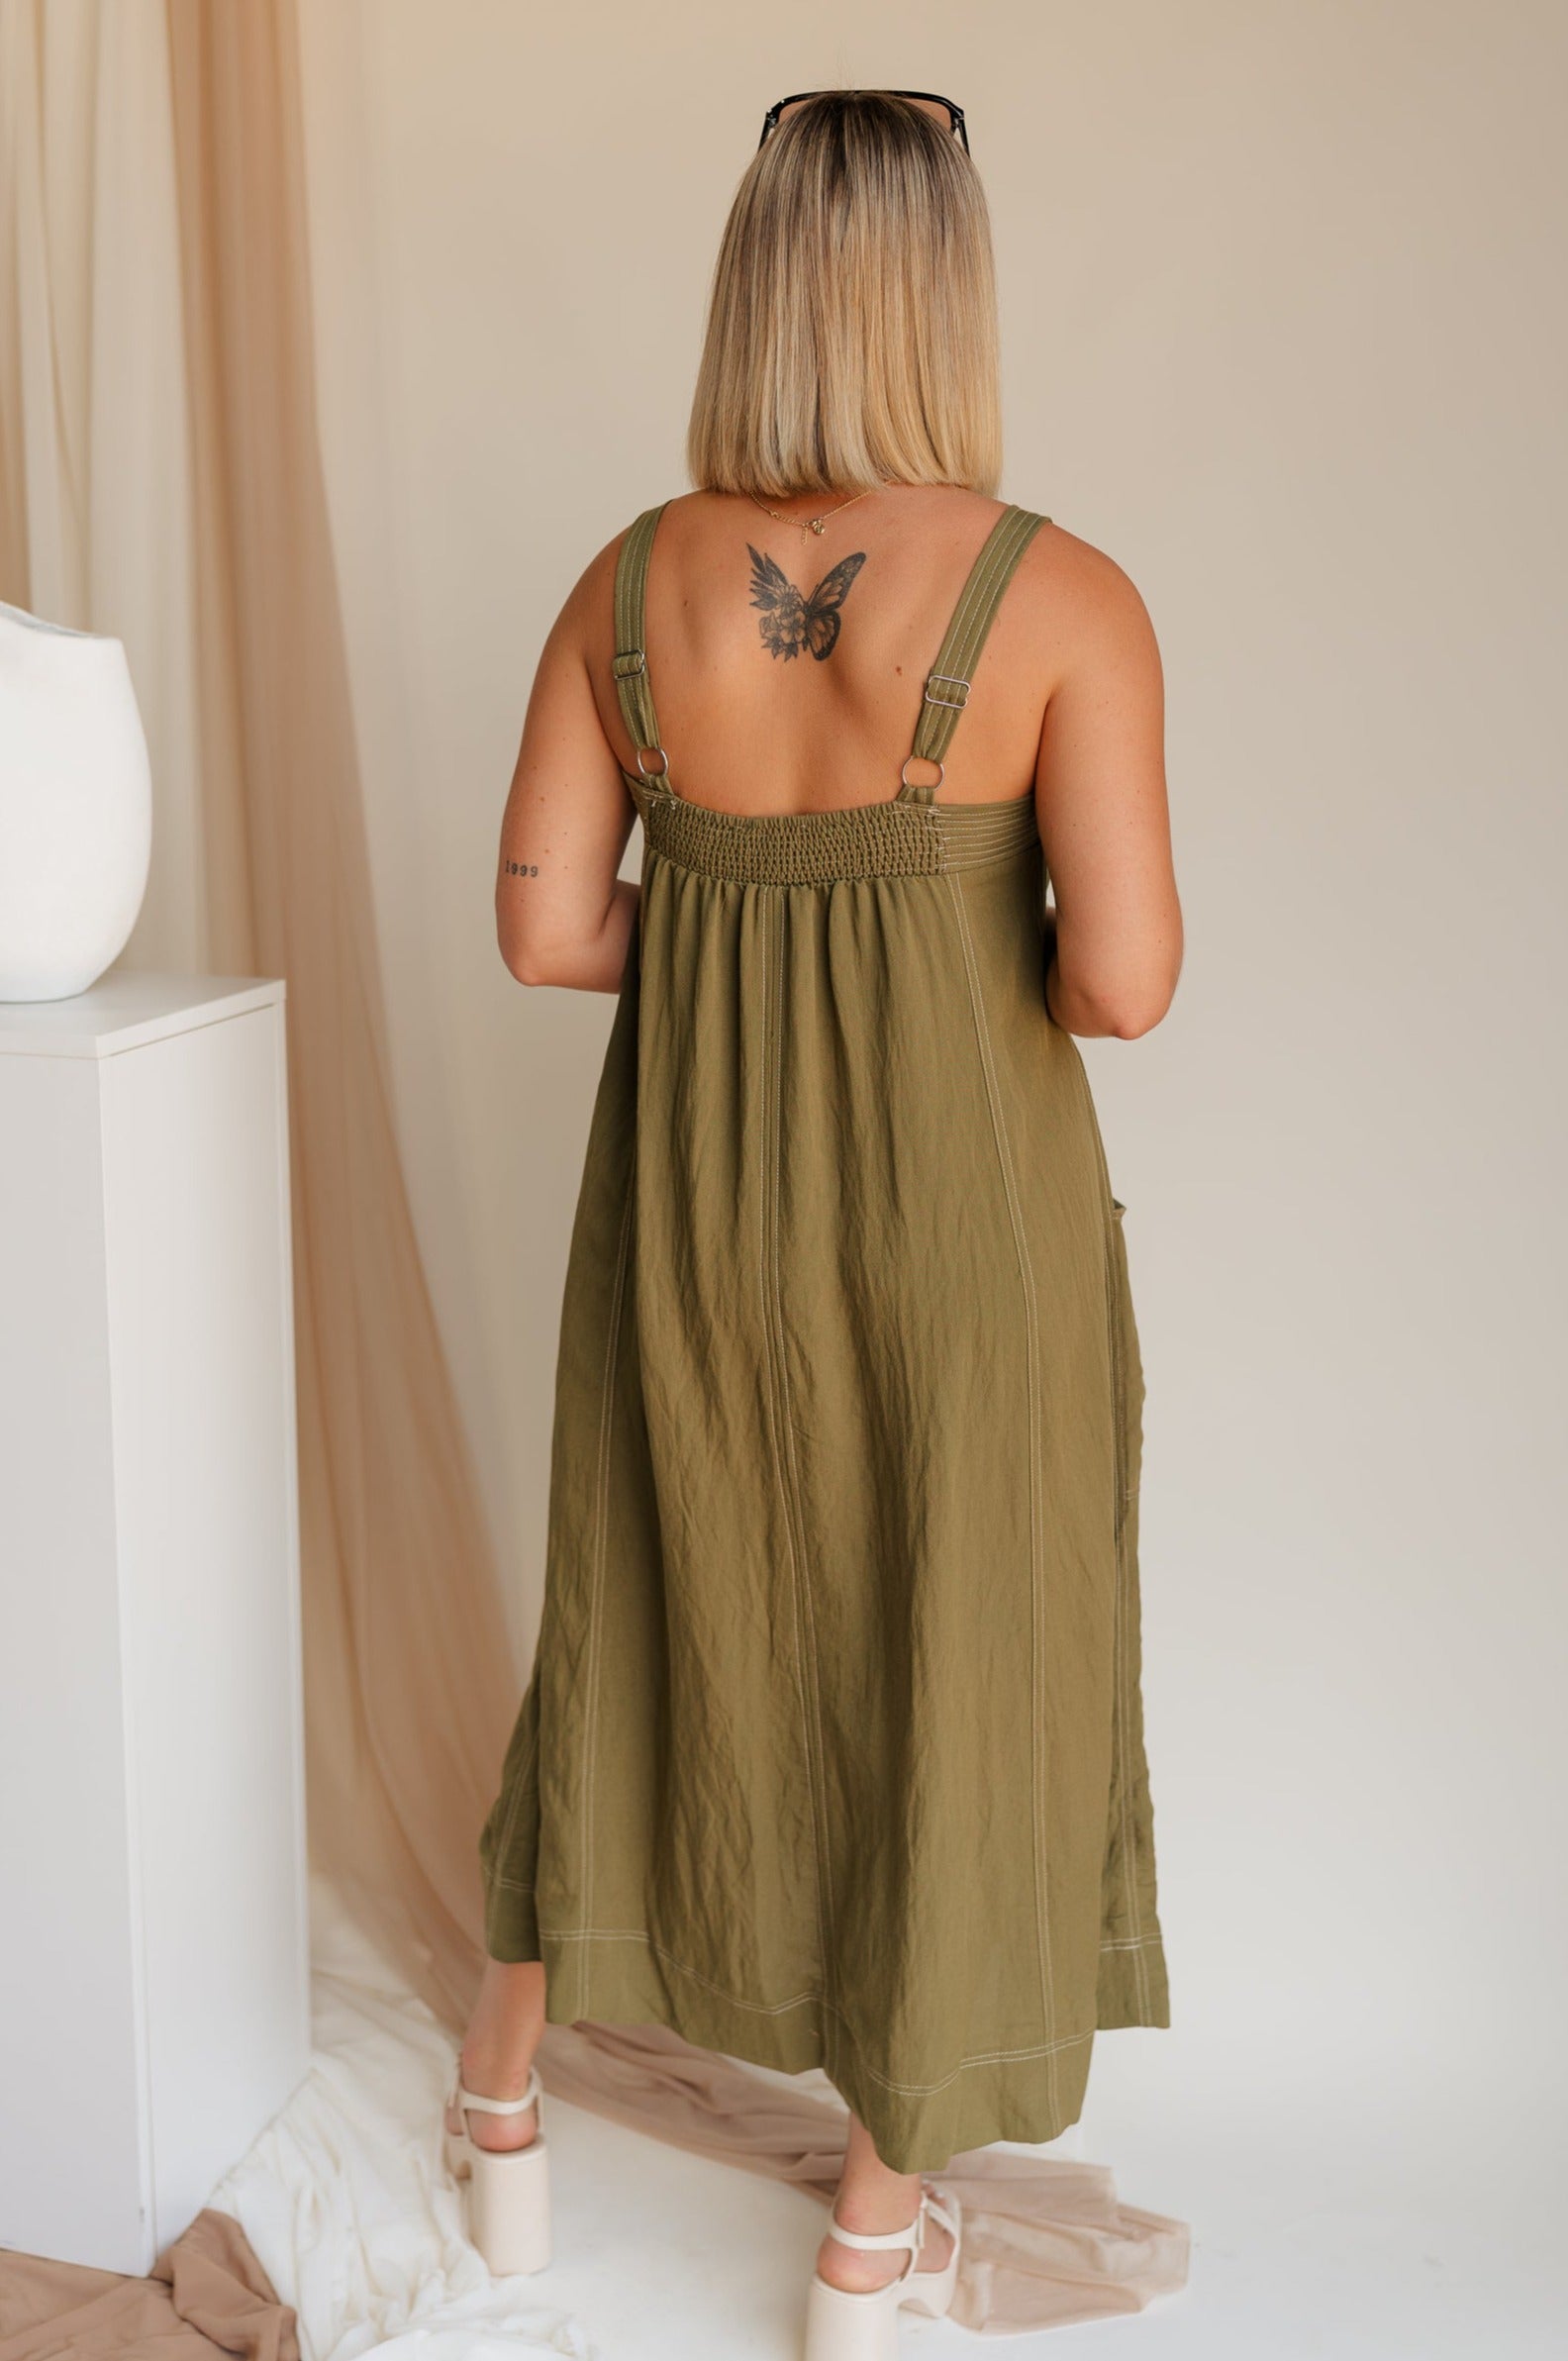 Back view of model wearing Melanie Olive Midi Dress. This is an olive midi dress, with white stitch details, midi length, pockets, and adjustable straps.